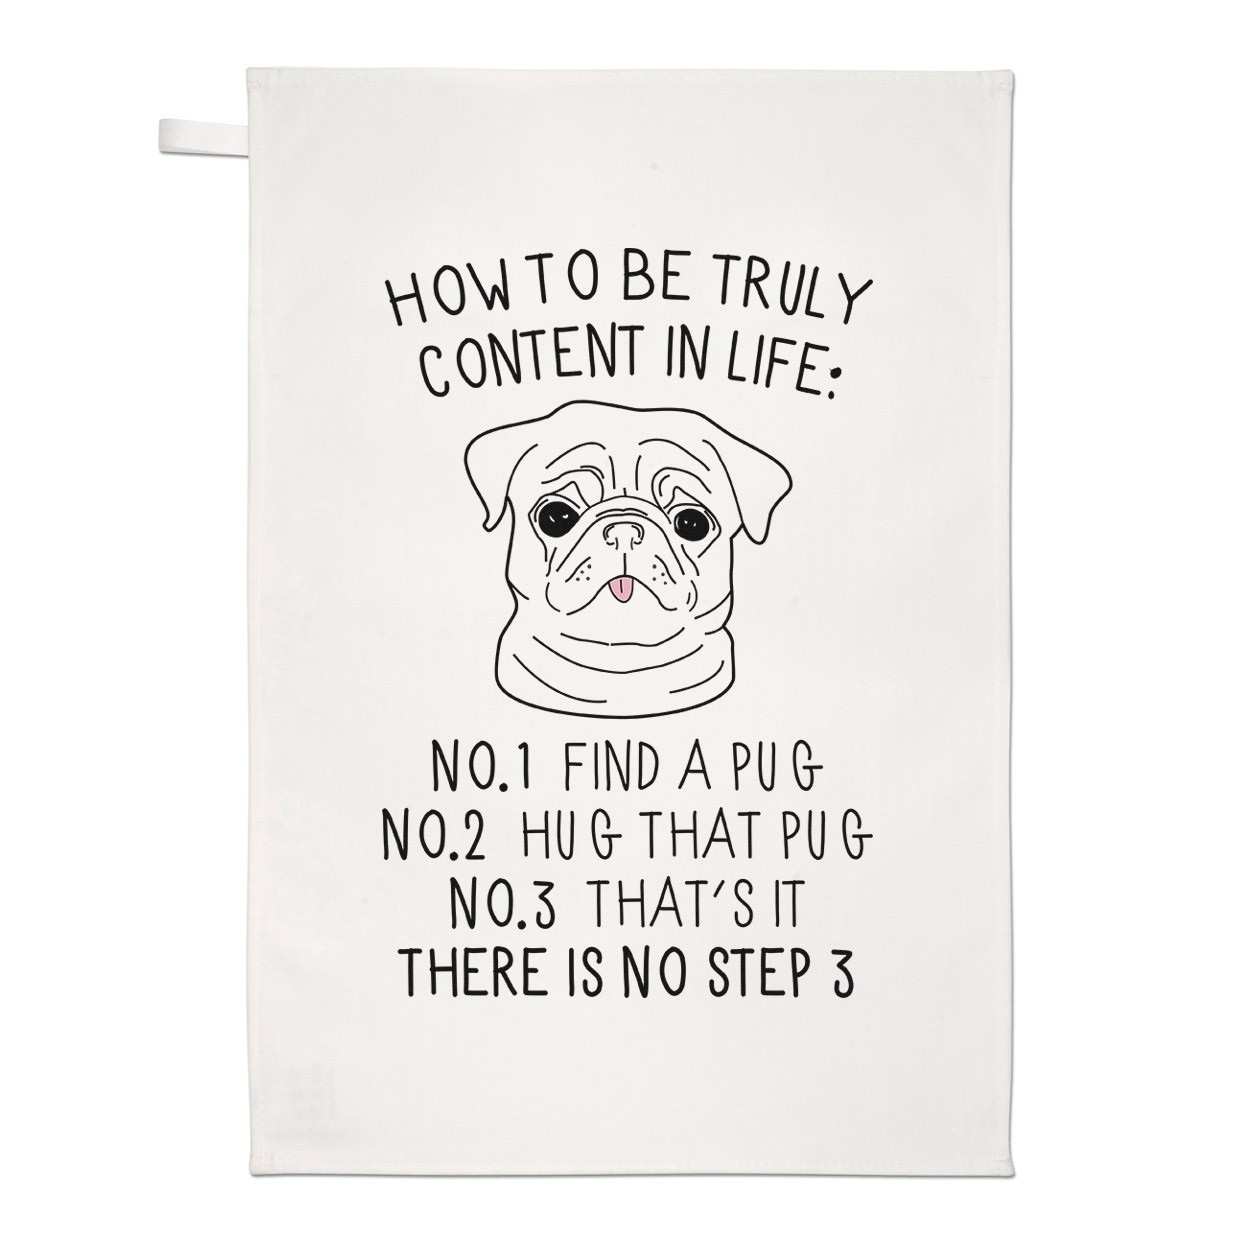 How To Be Truly Content In Life Pug Tea Towel Dish Cloth